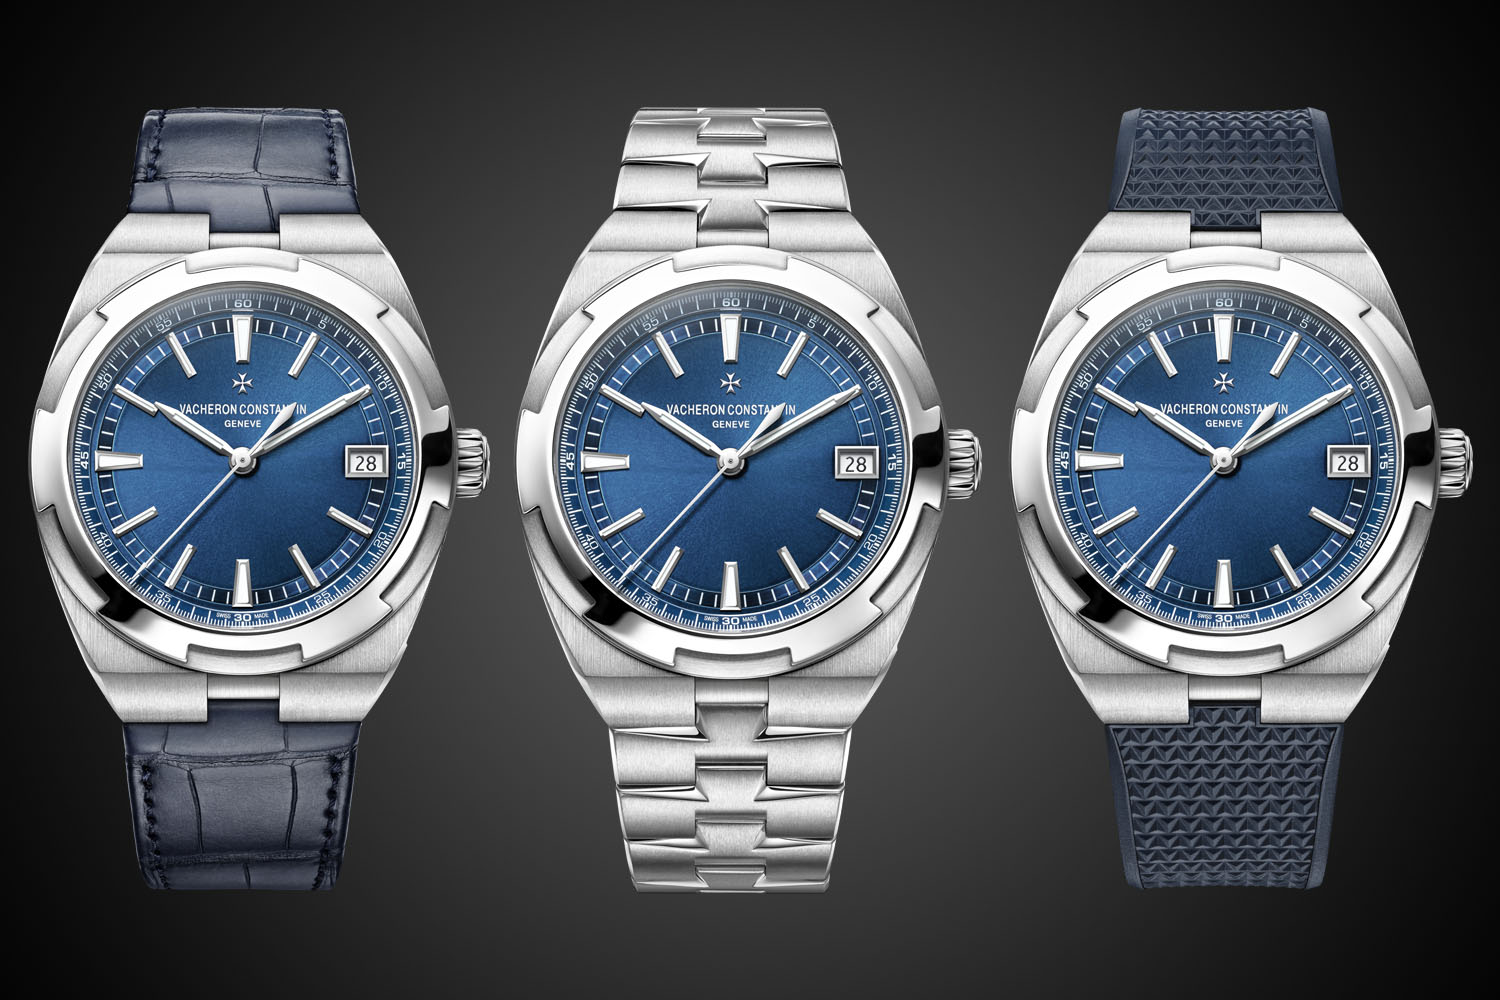 Is the Vacheron Constantin Overseas going to become the next Nautilus or Royal Oak?